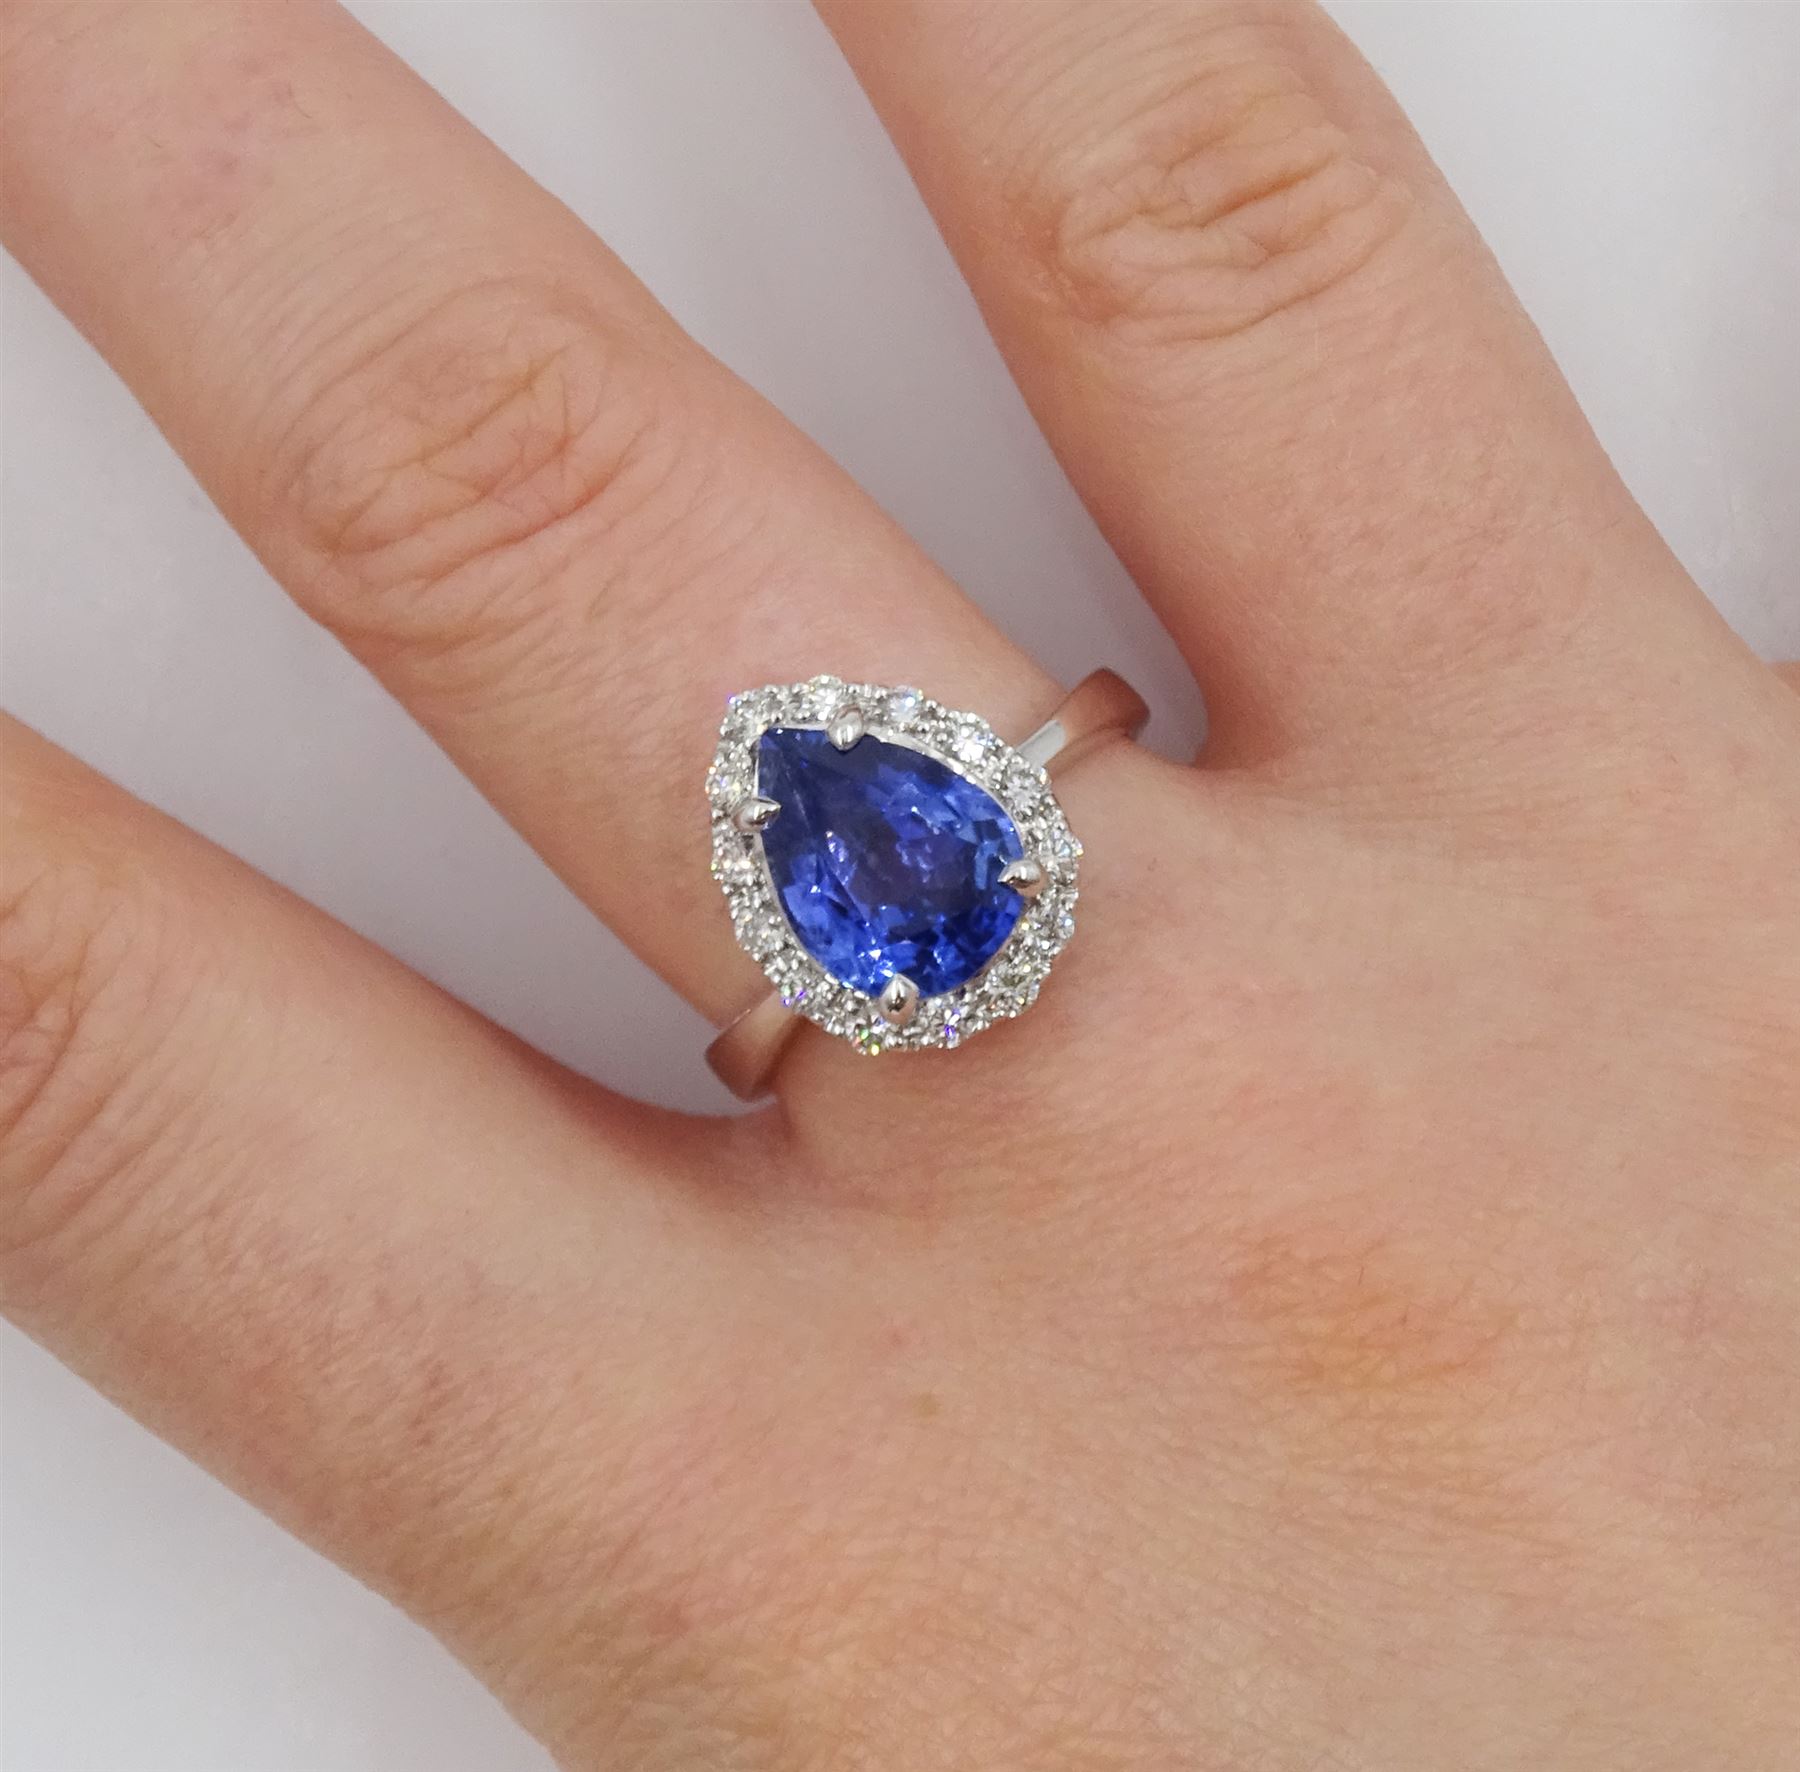 18ct white gold pear cut sapphire and round brilliant cut diamond cluster ring - Image 2 of 4